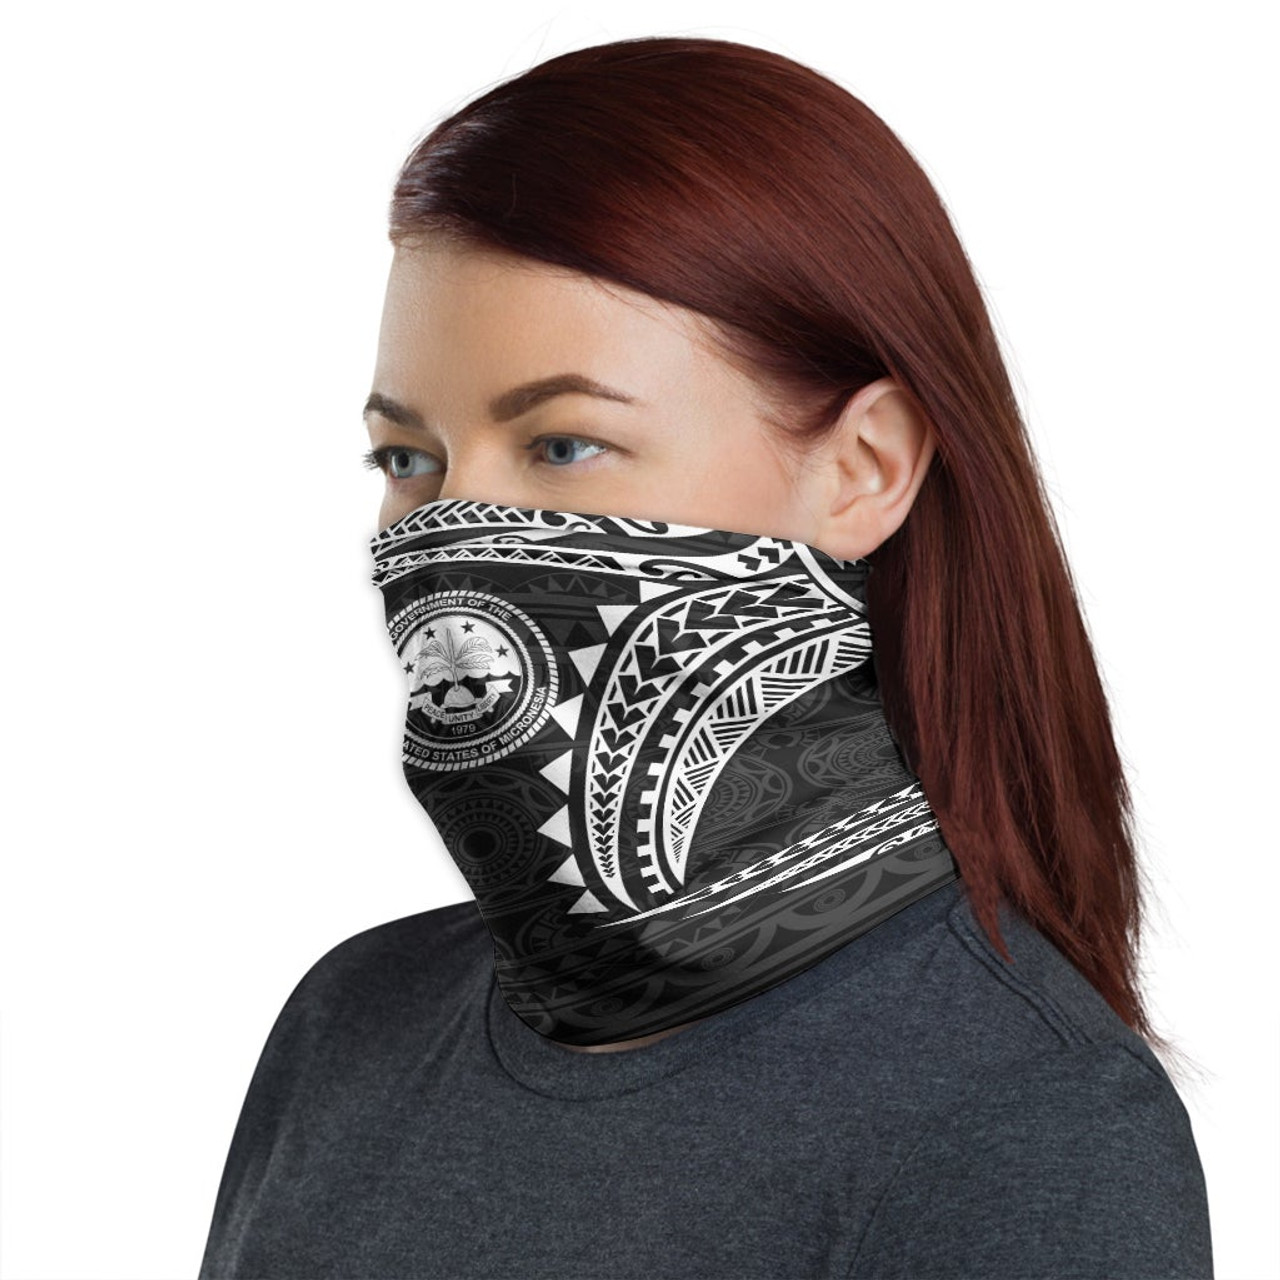 Federated States of Micronesia Neck Gaiter - Tribal Pattern White 1